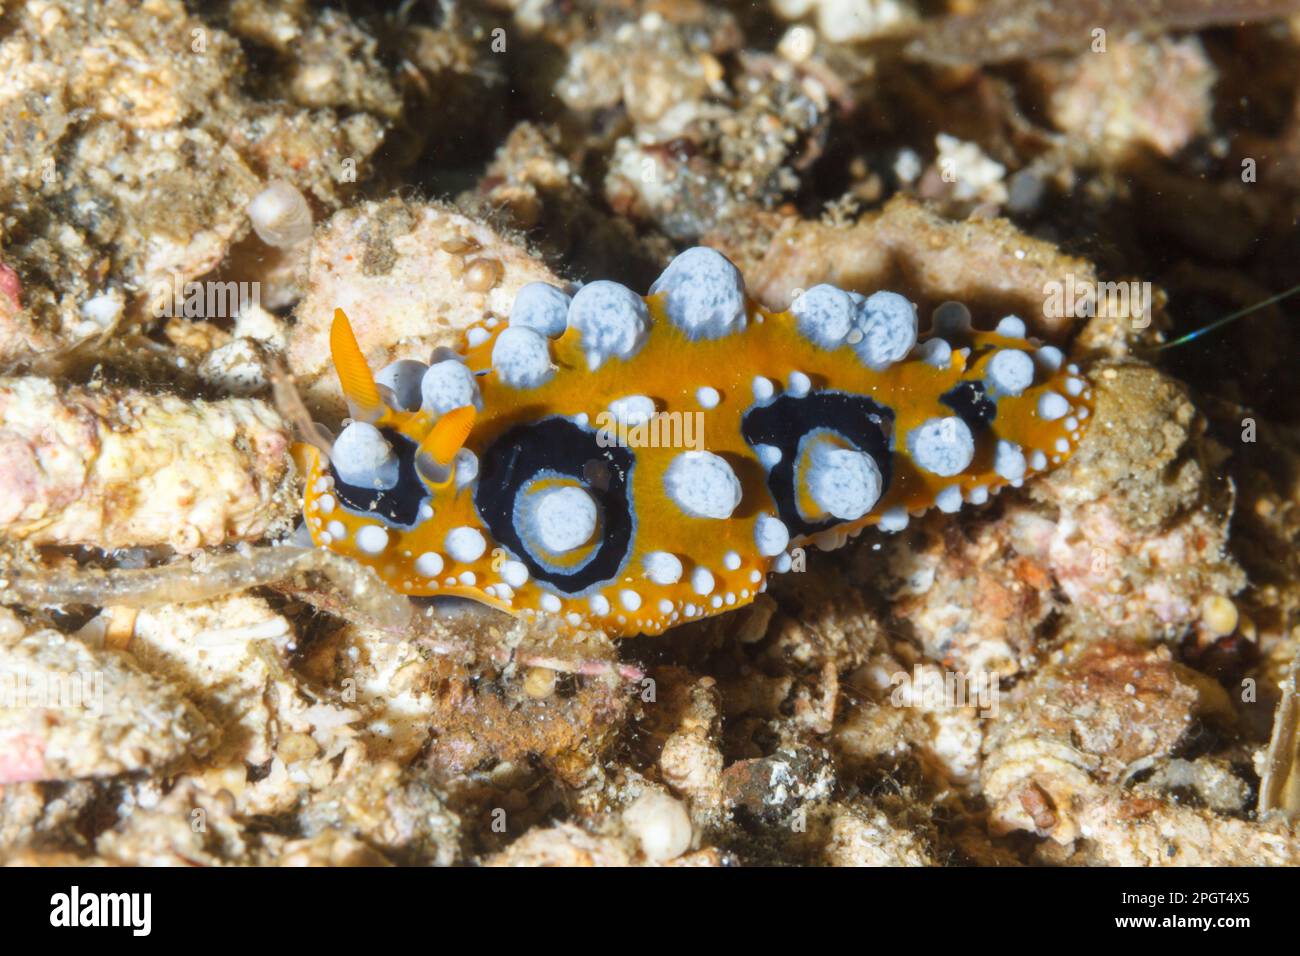 Phyllidia ocellata nudibranch. Lembeh Strait, North Sulawesi, Indonesia Stock Photo